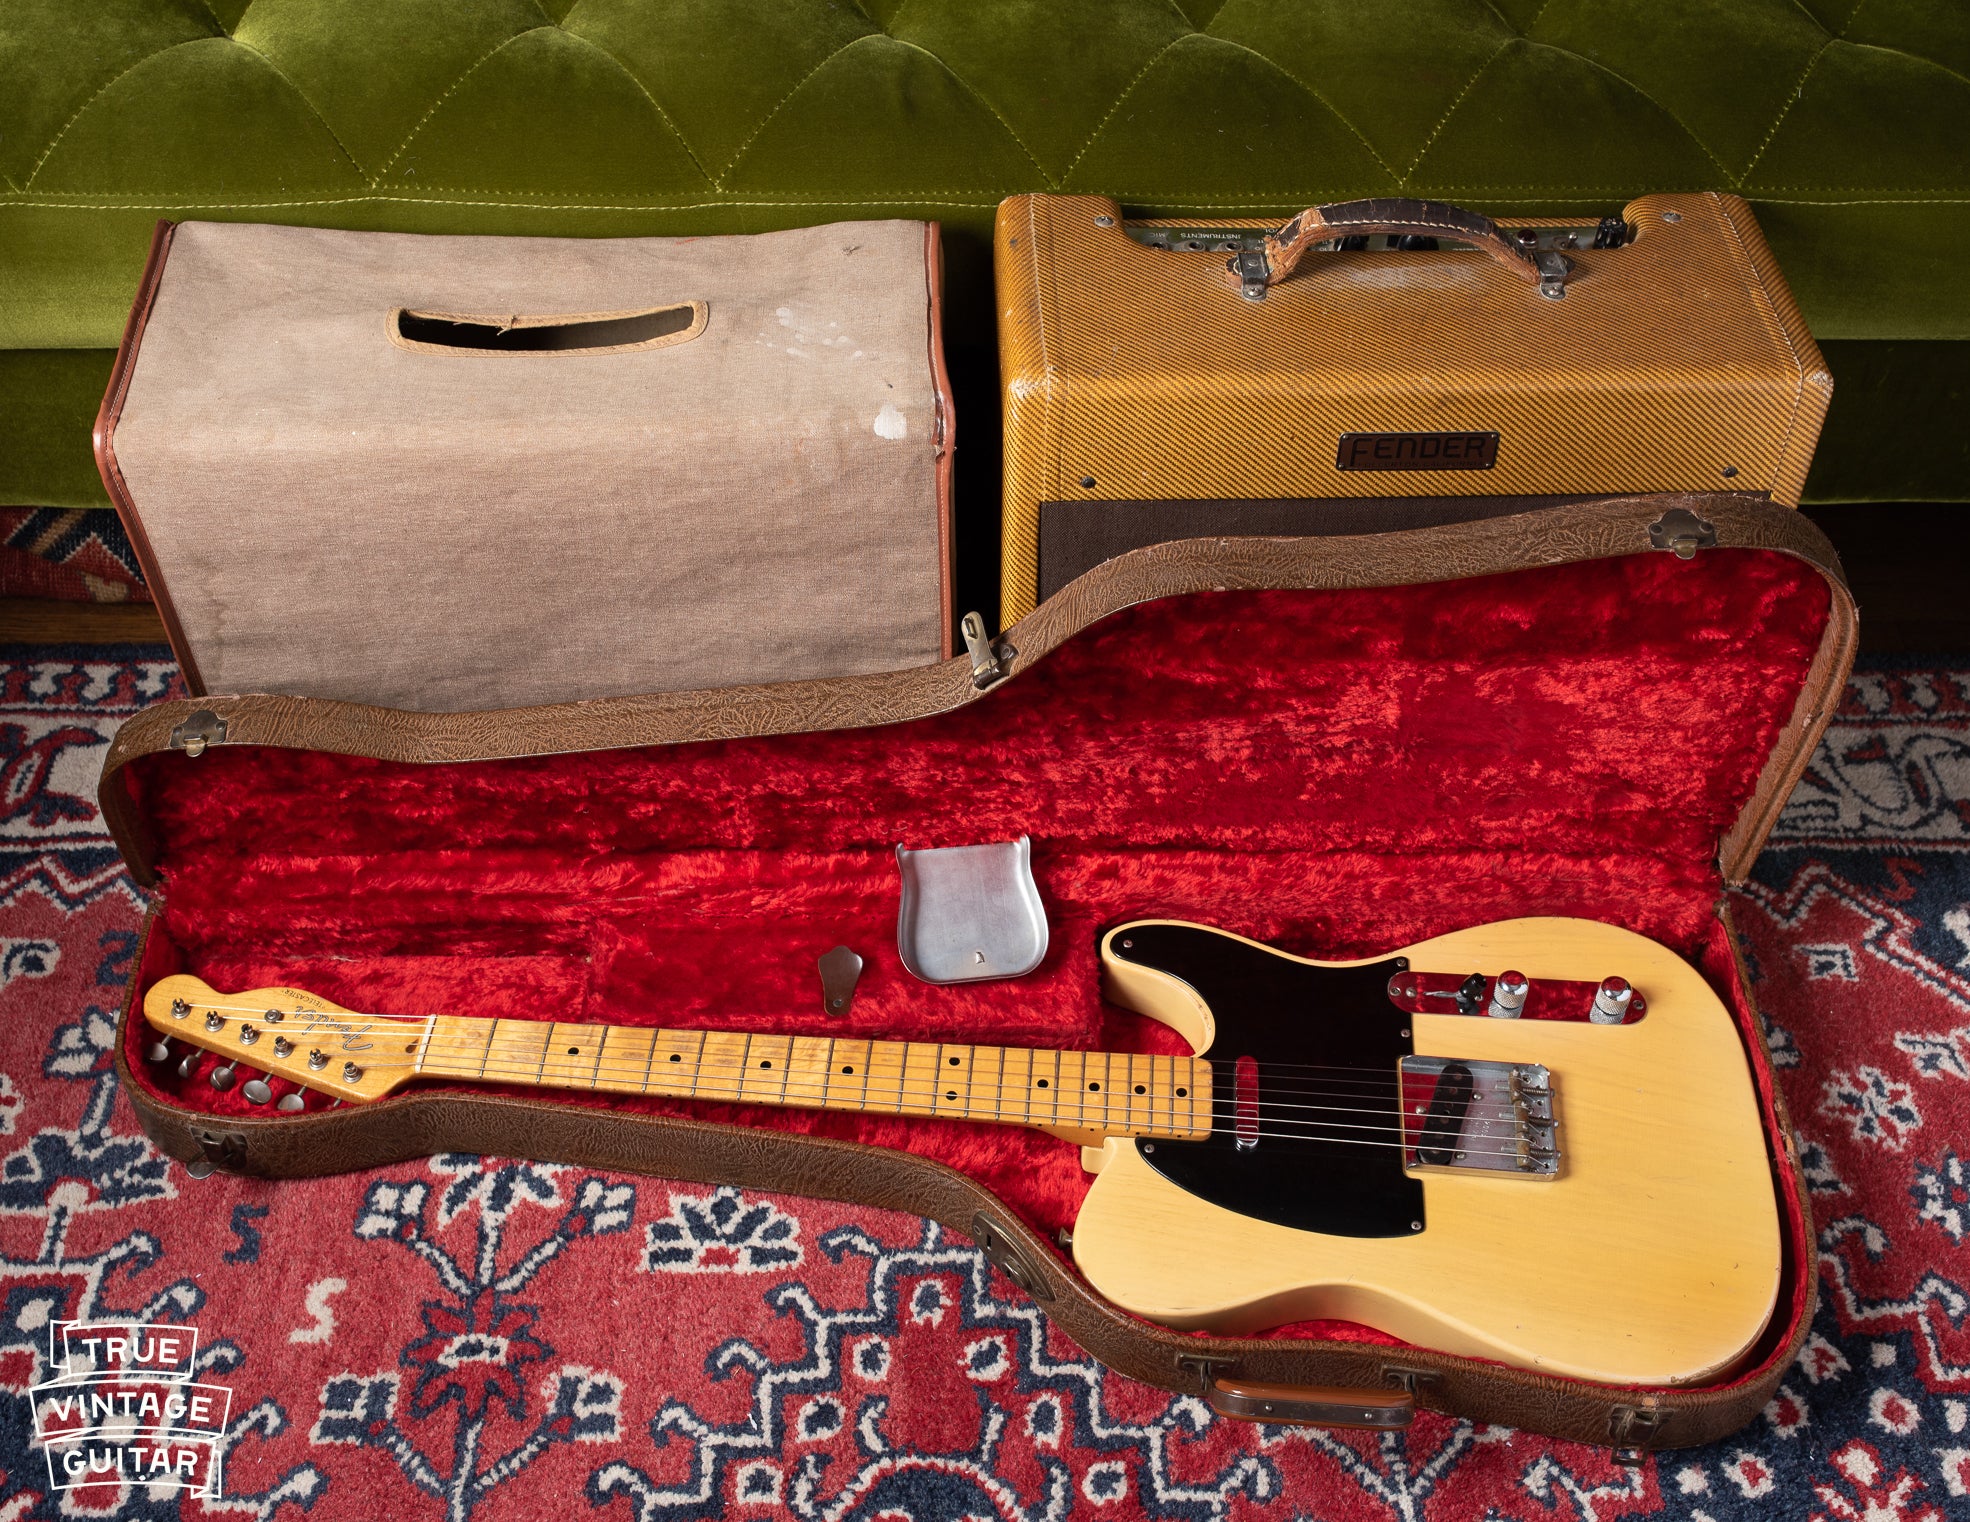 How to find the year and value of 1950s Fender Telecaster guitars